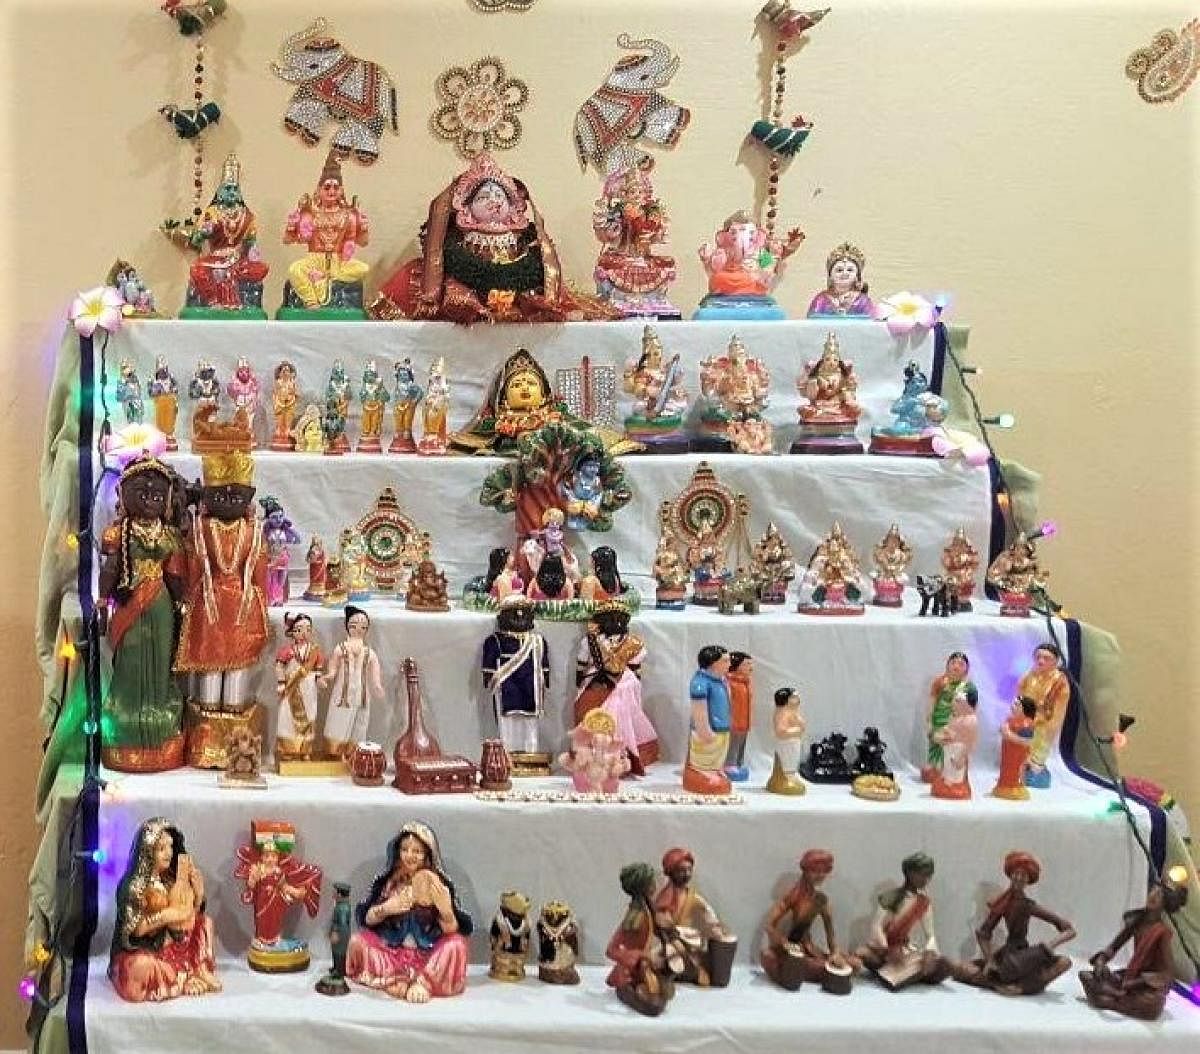 Dasra dolls on display in a home. Photos by Gouri Satya